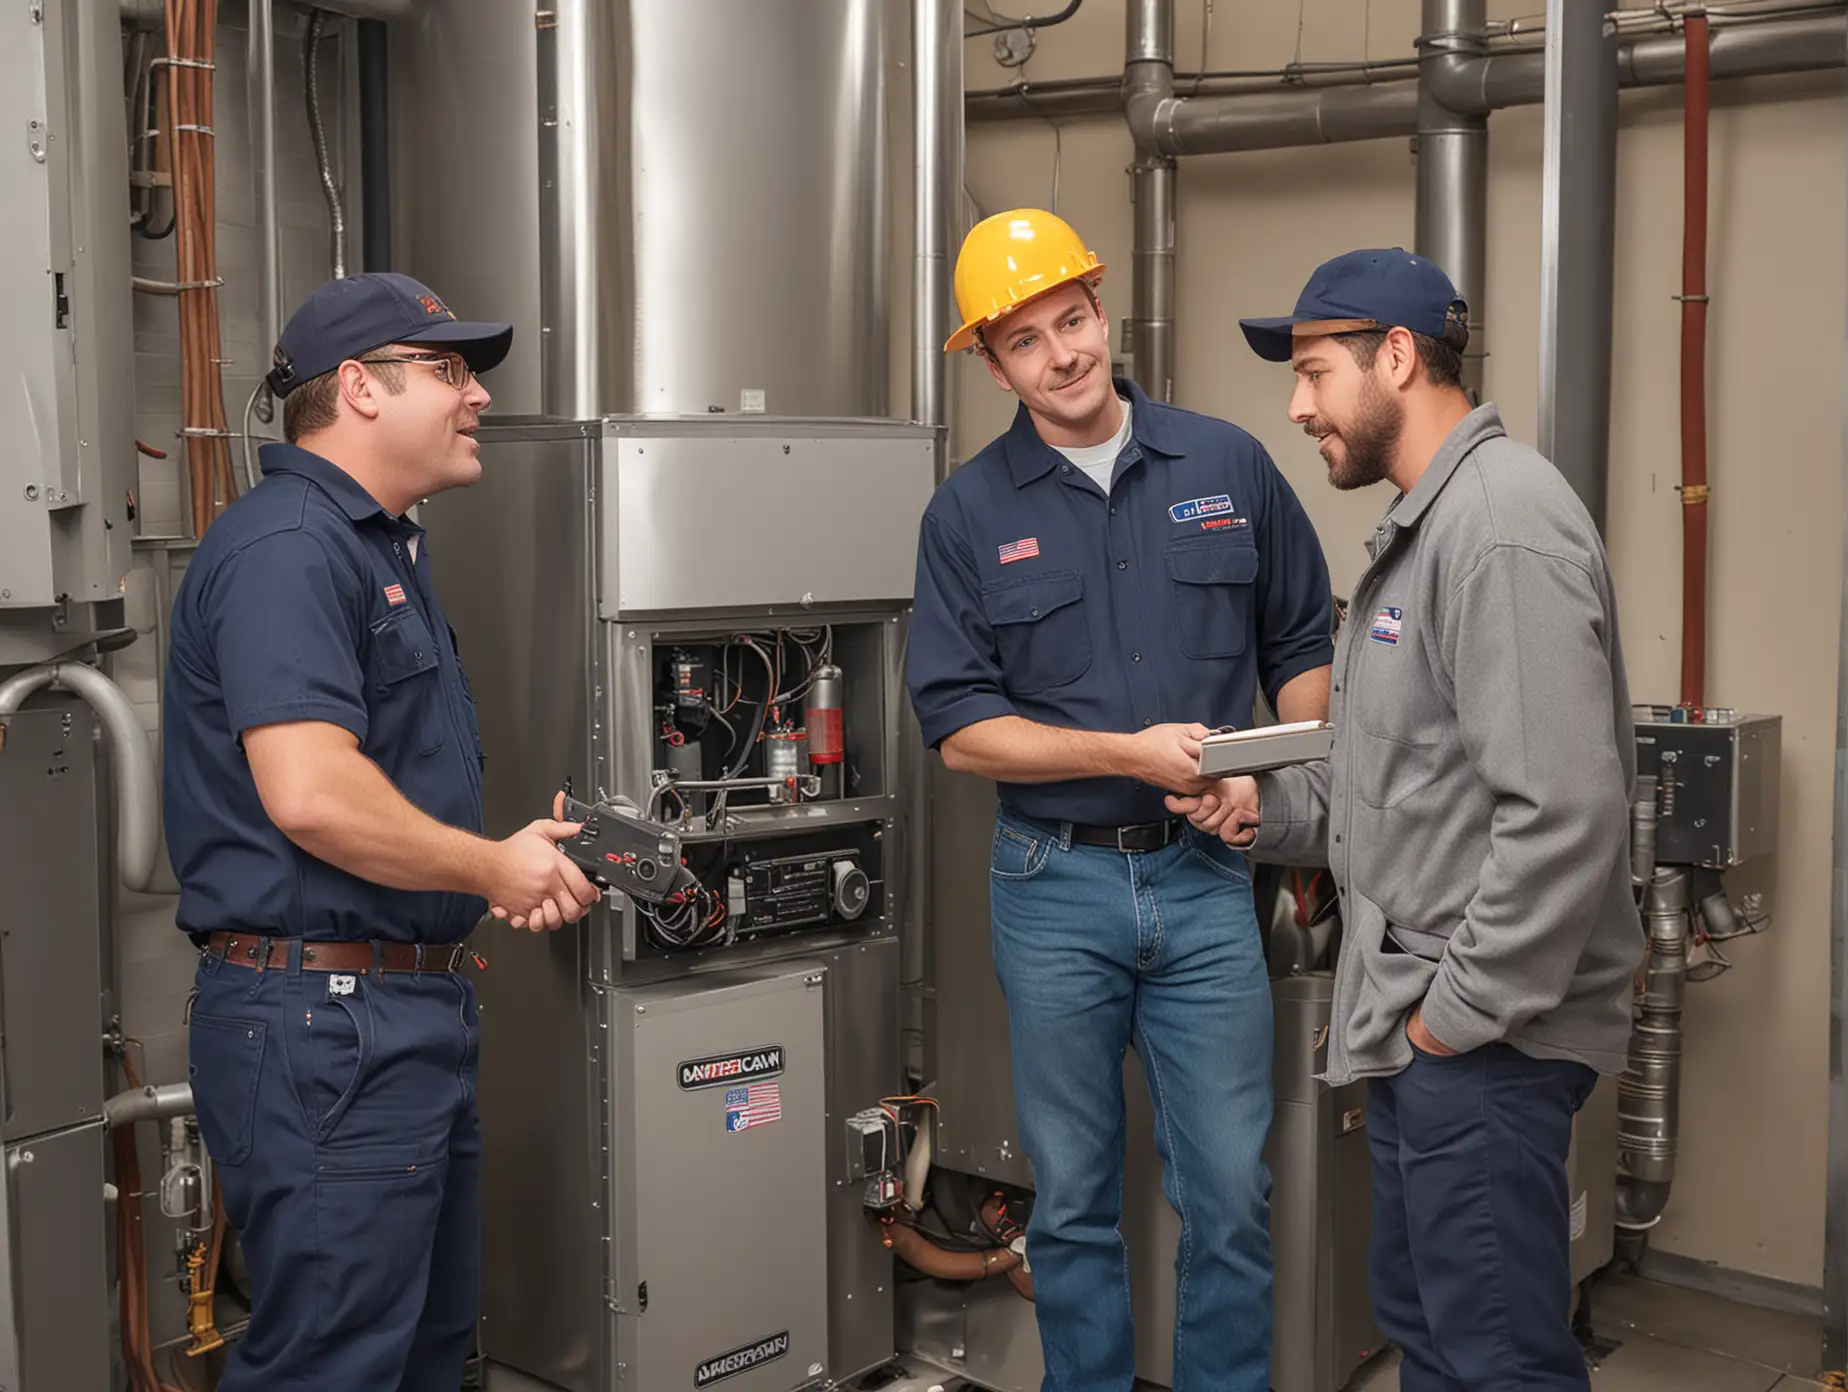 American Workers Maintaining Furnace Services